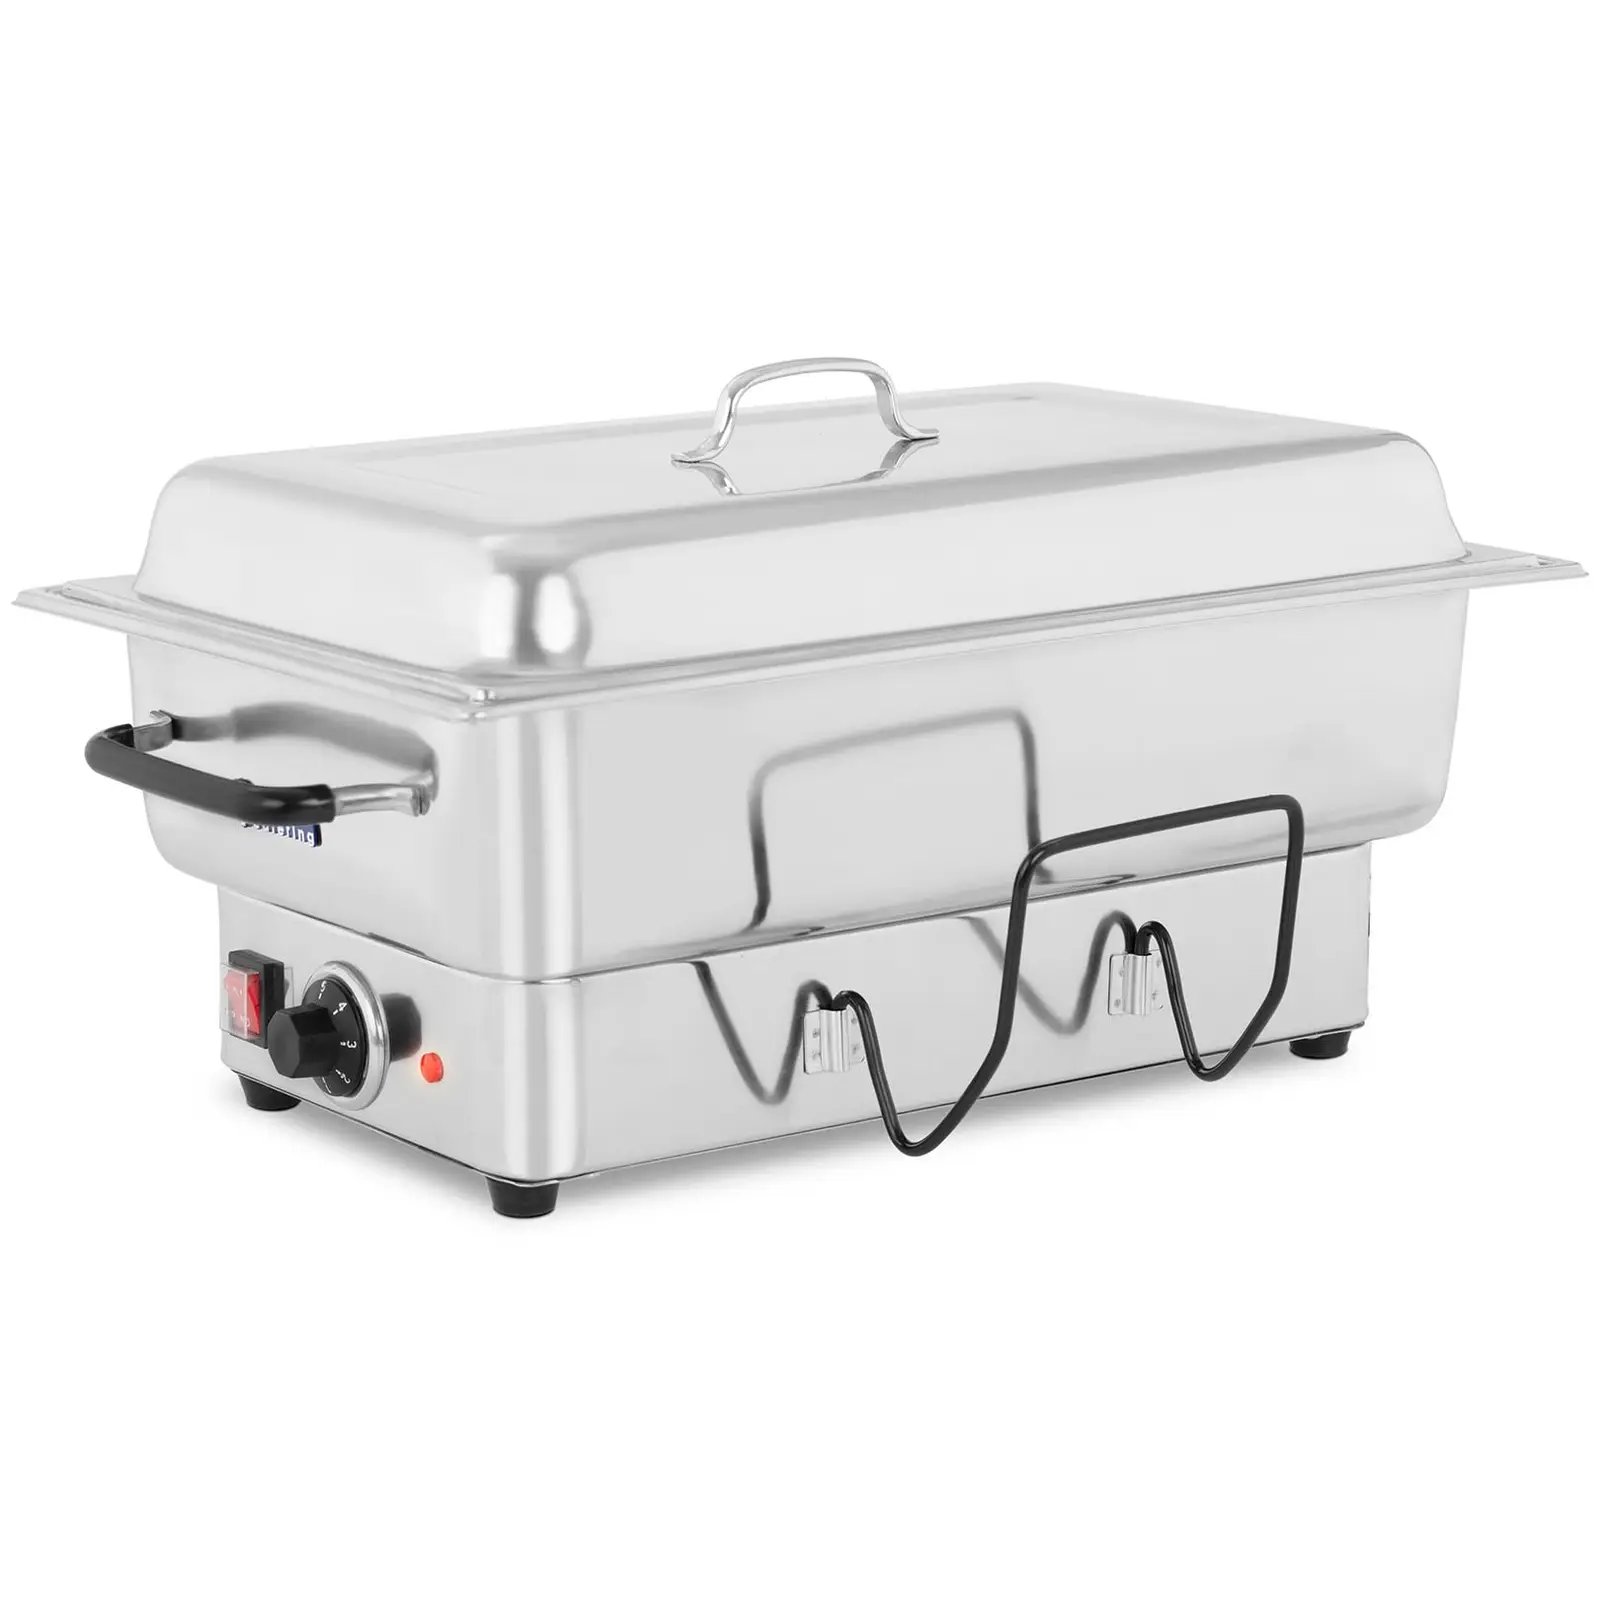 Chafing Dish - 1600 W - GN 1/1 Behälter - 100 mm